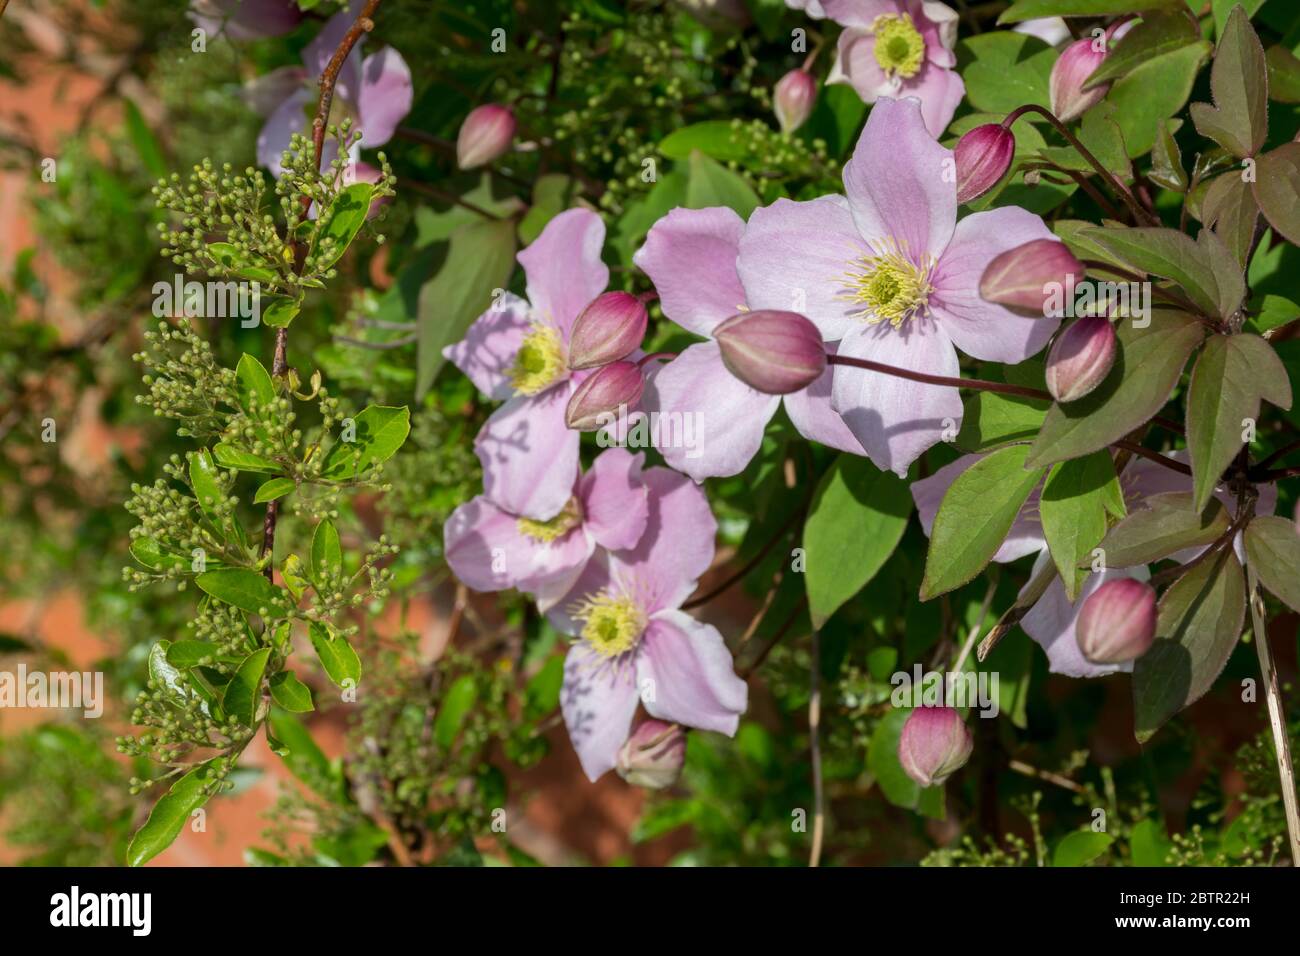 Flowers and buds of Mountain Clematis Stock Photo